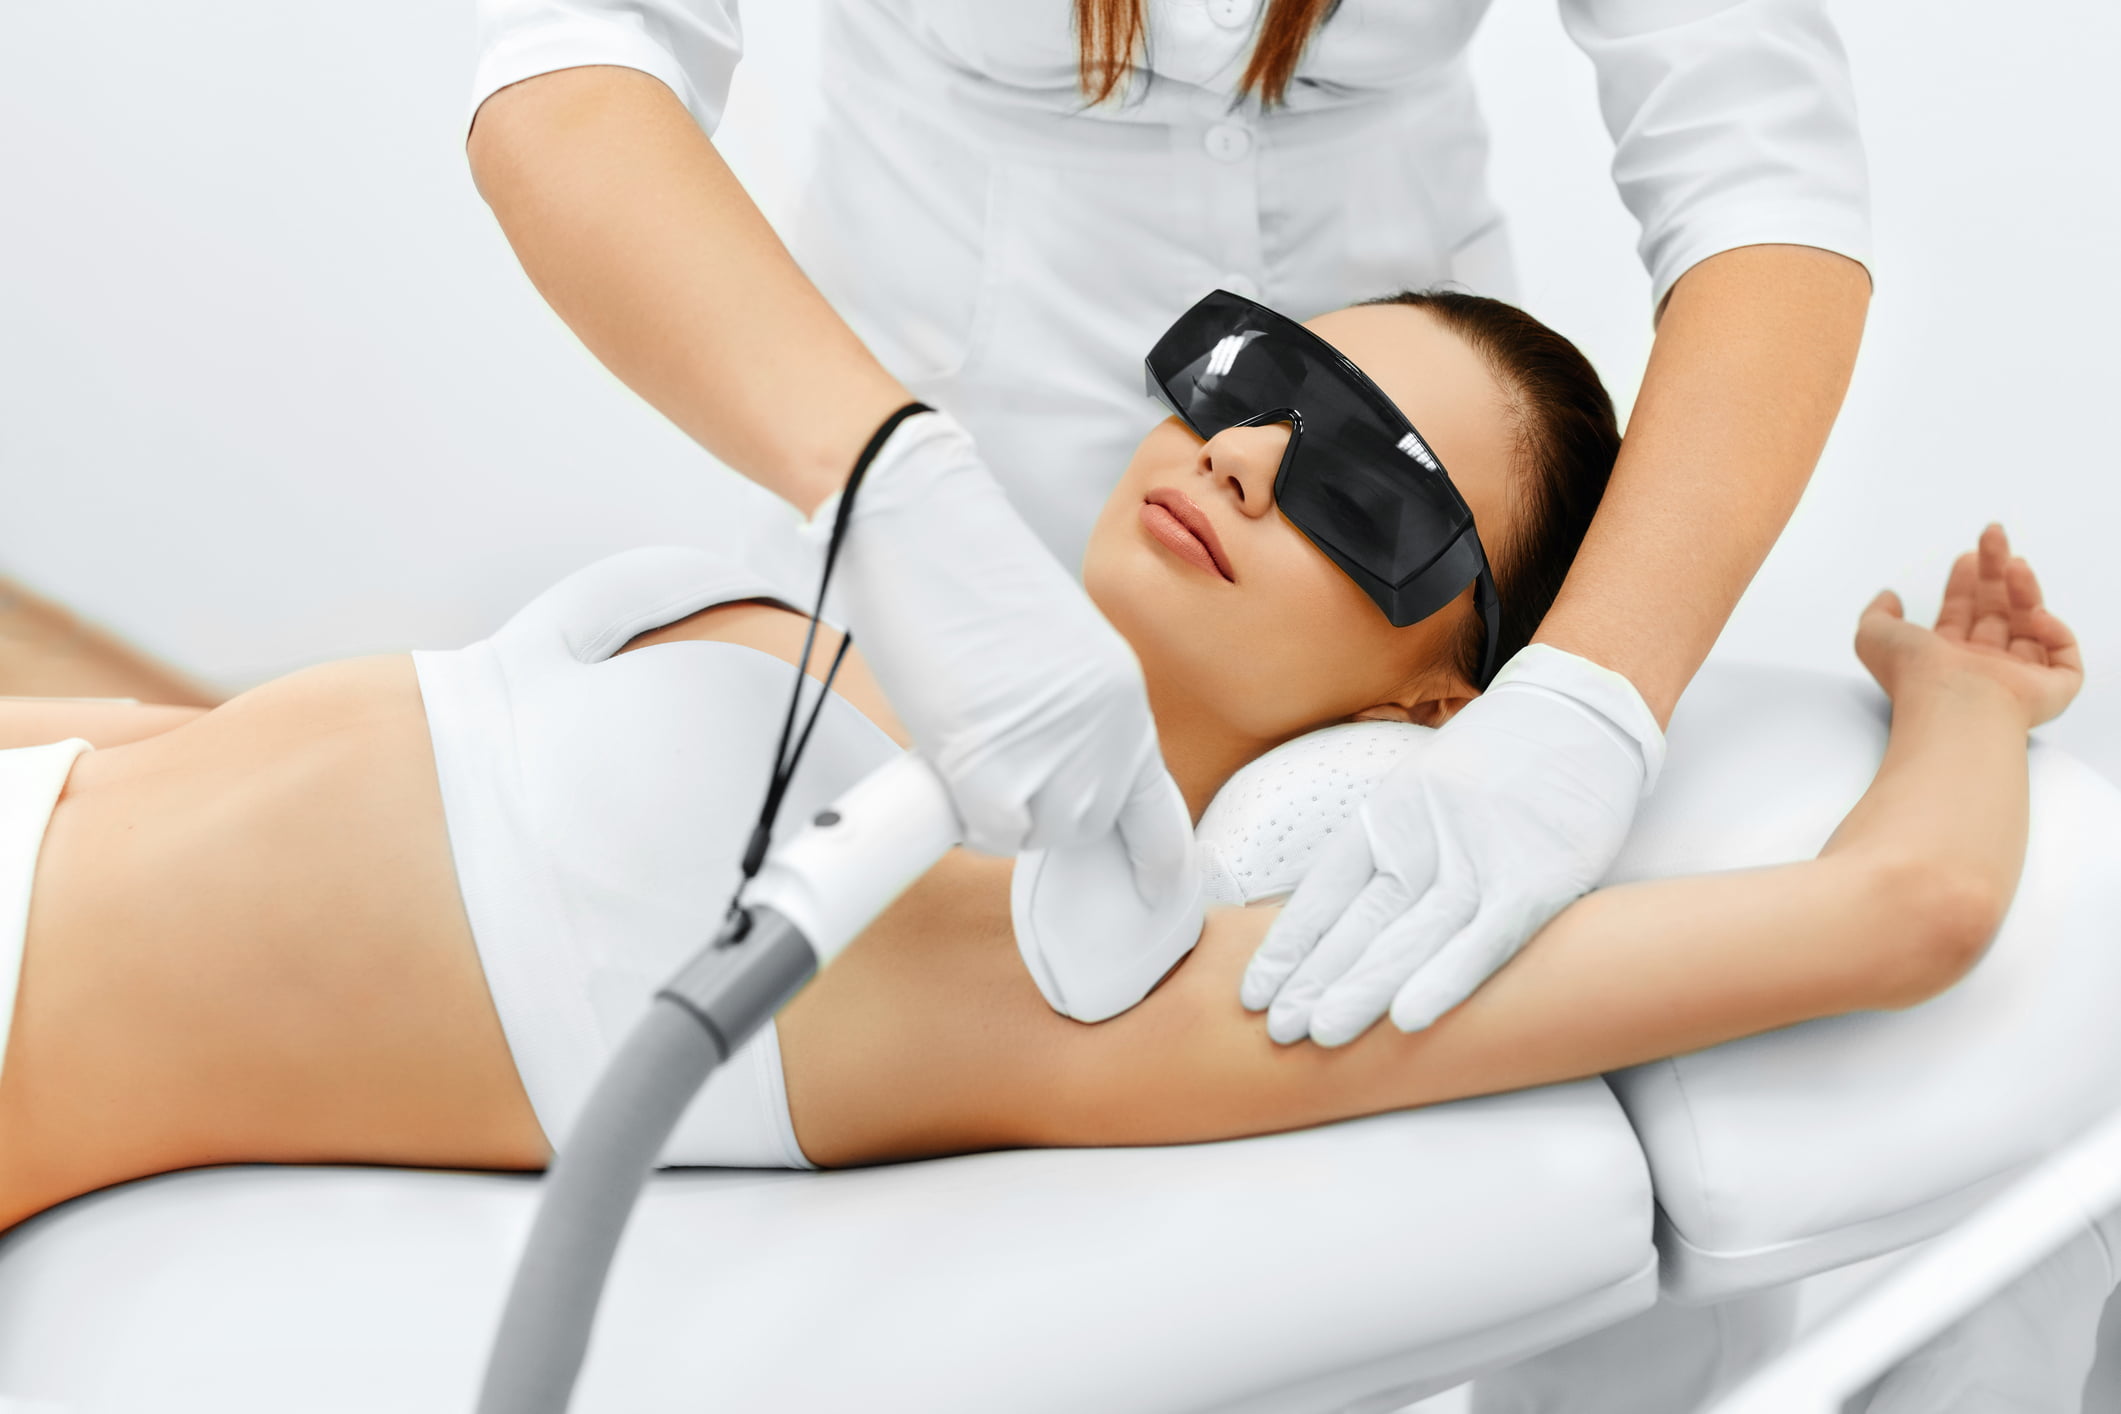 laser skin therapy is great for creating a more youthful appearance